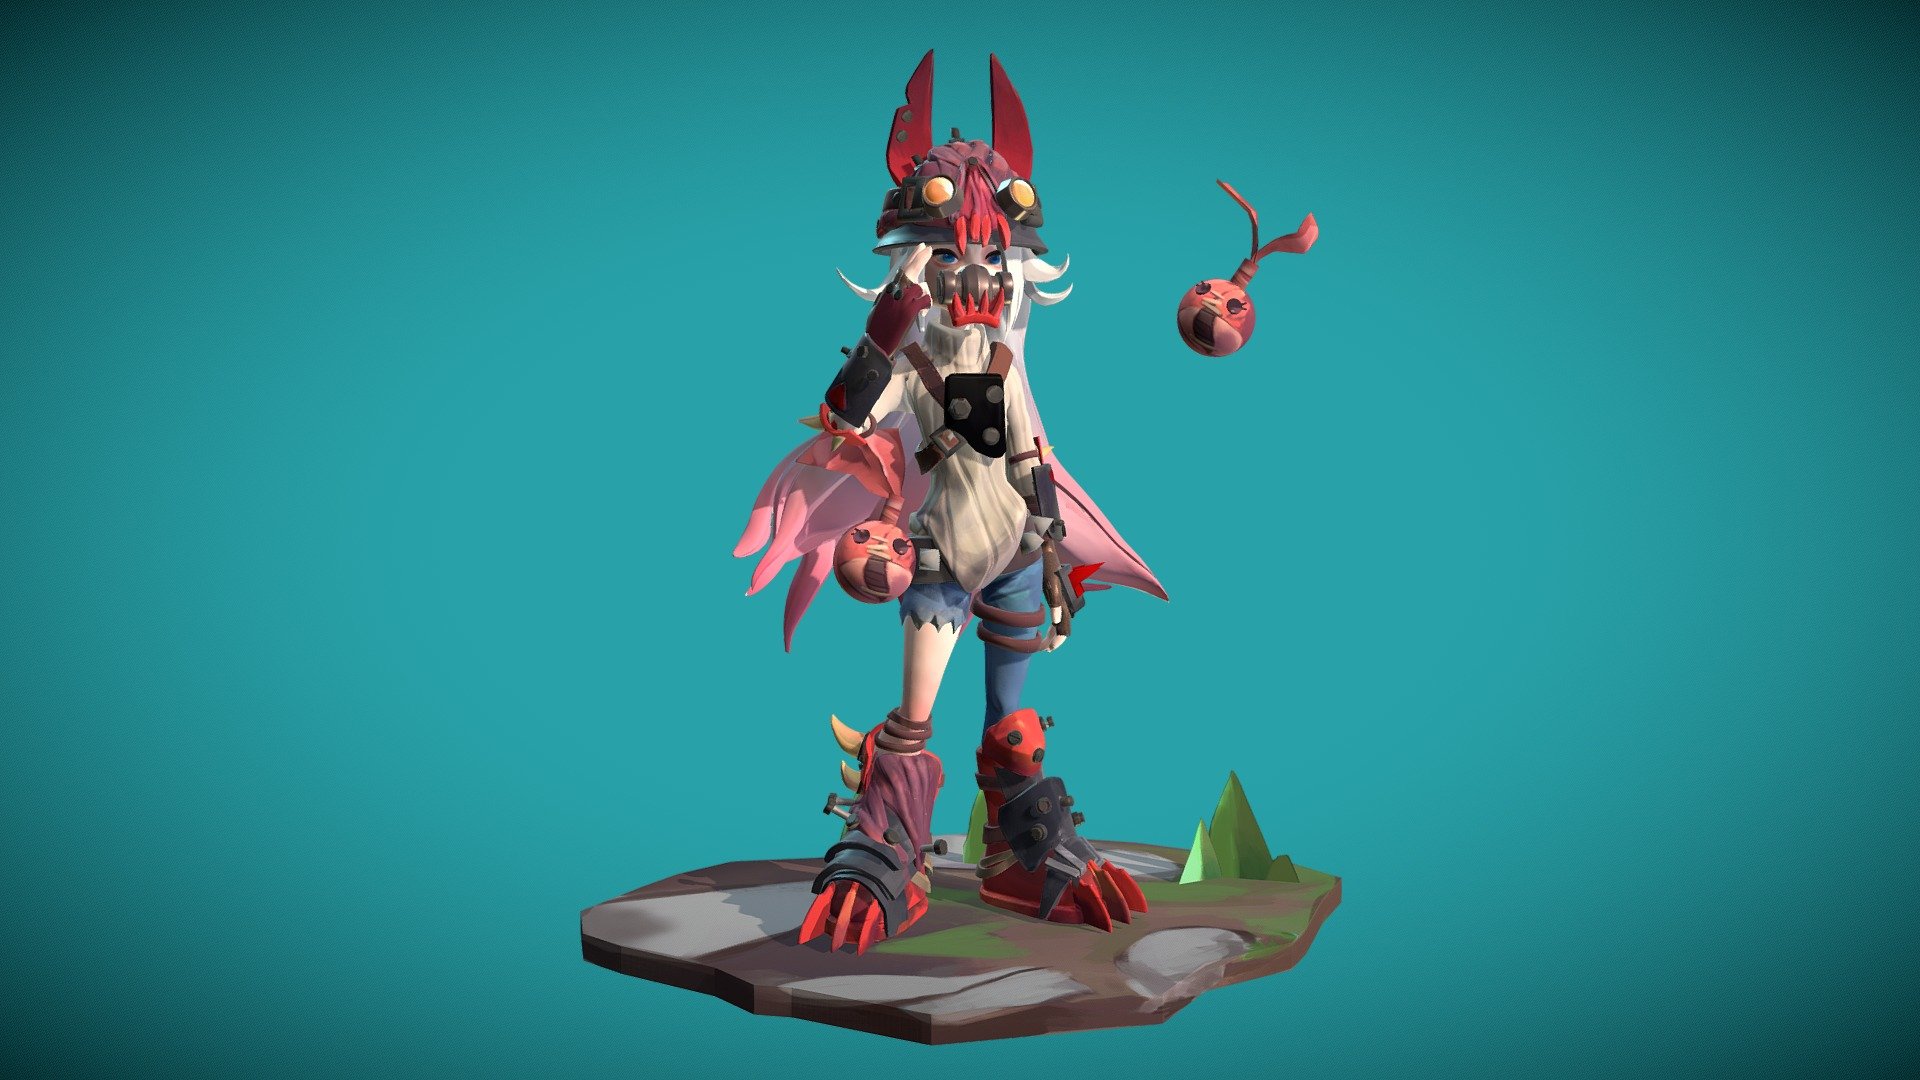 Finished this model for my stylized exam !

This is a character I made based on the cool concept by the amazing concept artist Tooth Wu  !
You can check their work out here https://www.artstation.com/artwork/ybq1ZO

I enjoyed bringing this character to life even though having to go through a lot of struggles. This is the first time such a complicated sculpt so there is still a lot of room for improvement.

Sculpting was done in Zbrush, retopology in 3DS MAX, texturing in Substance Painter and Photoshop 3d model